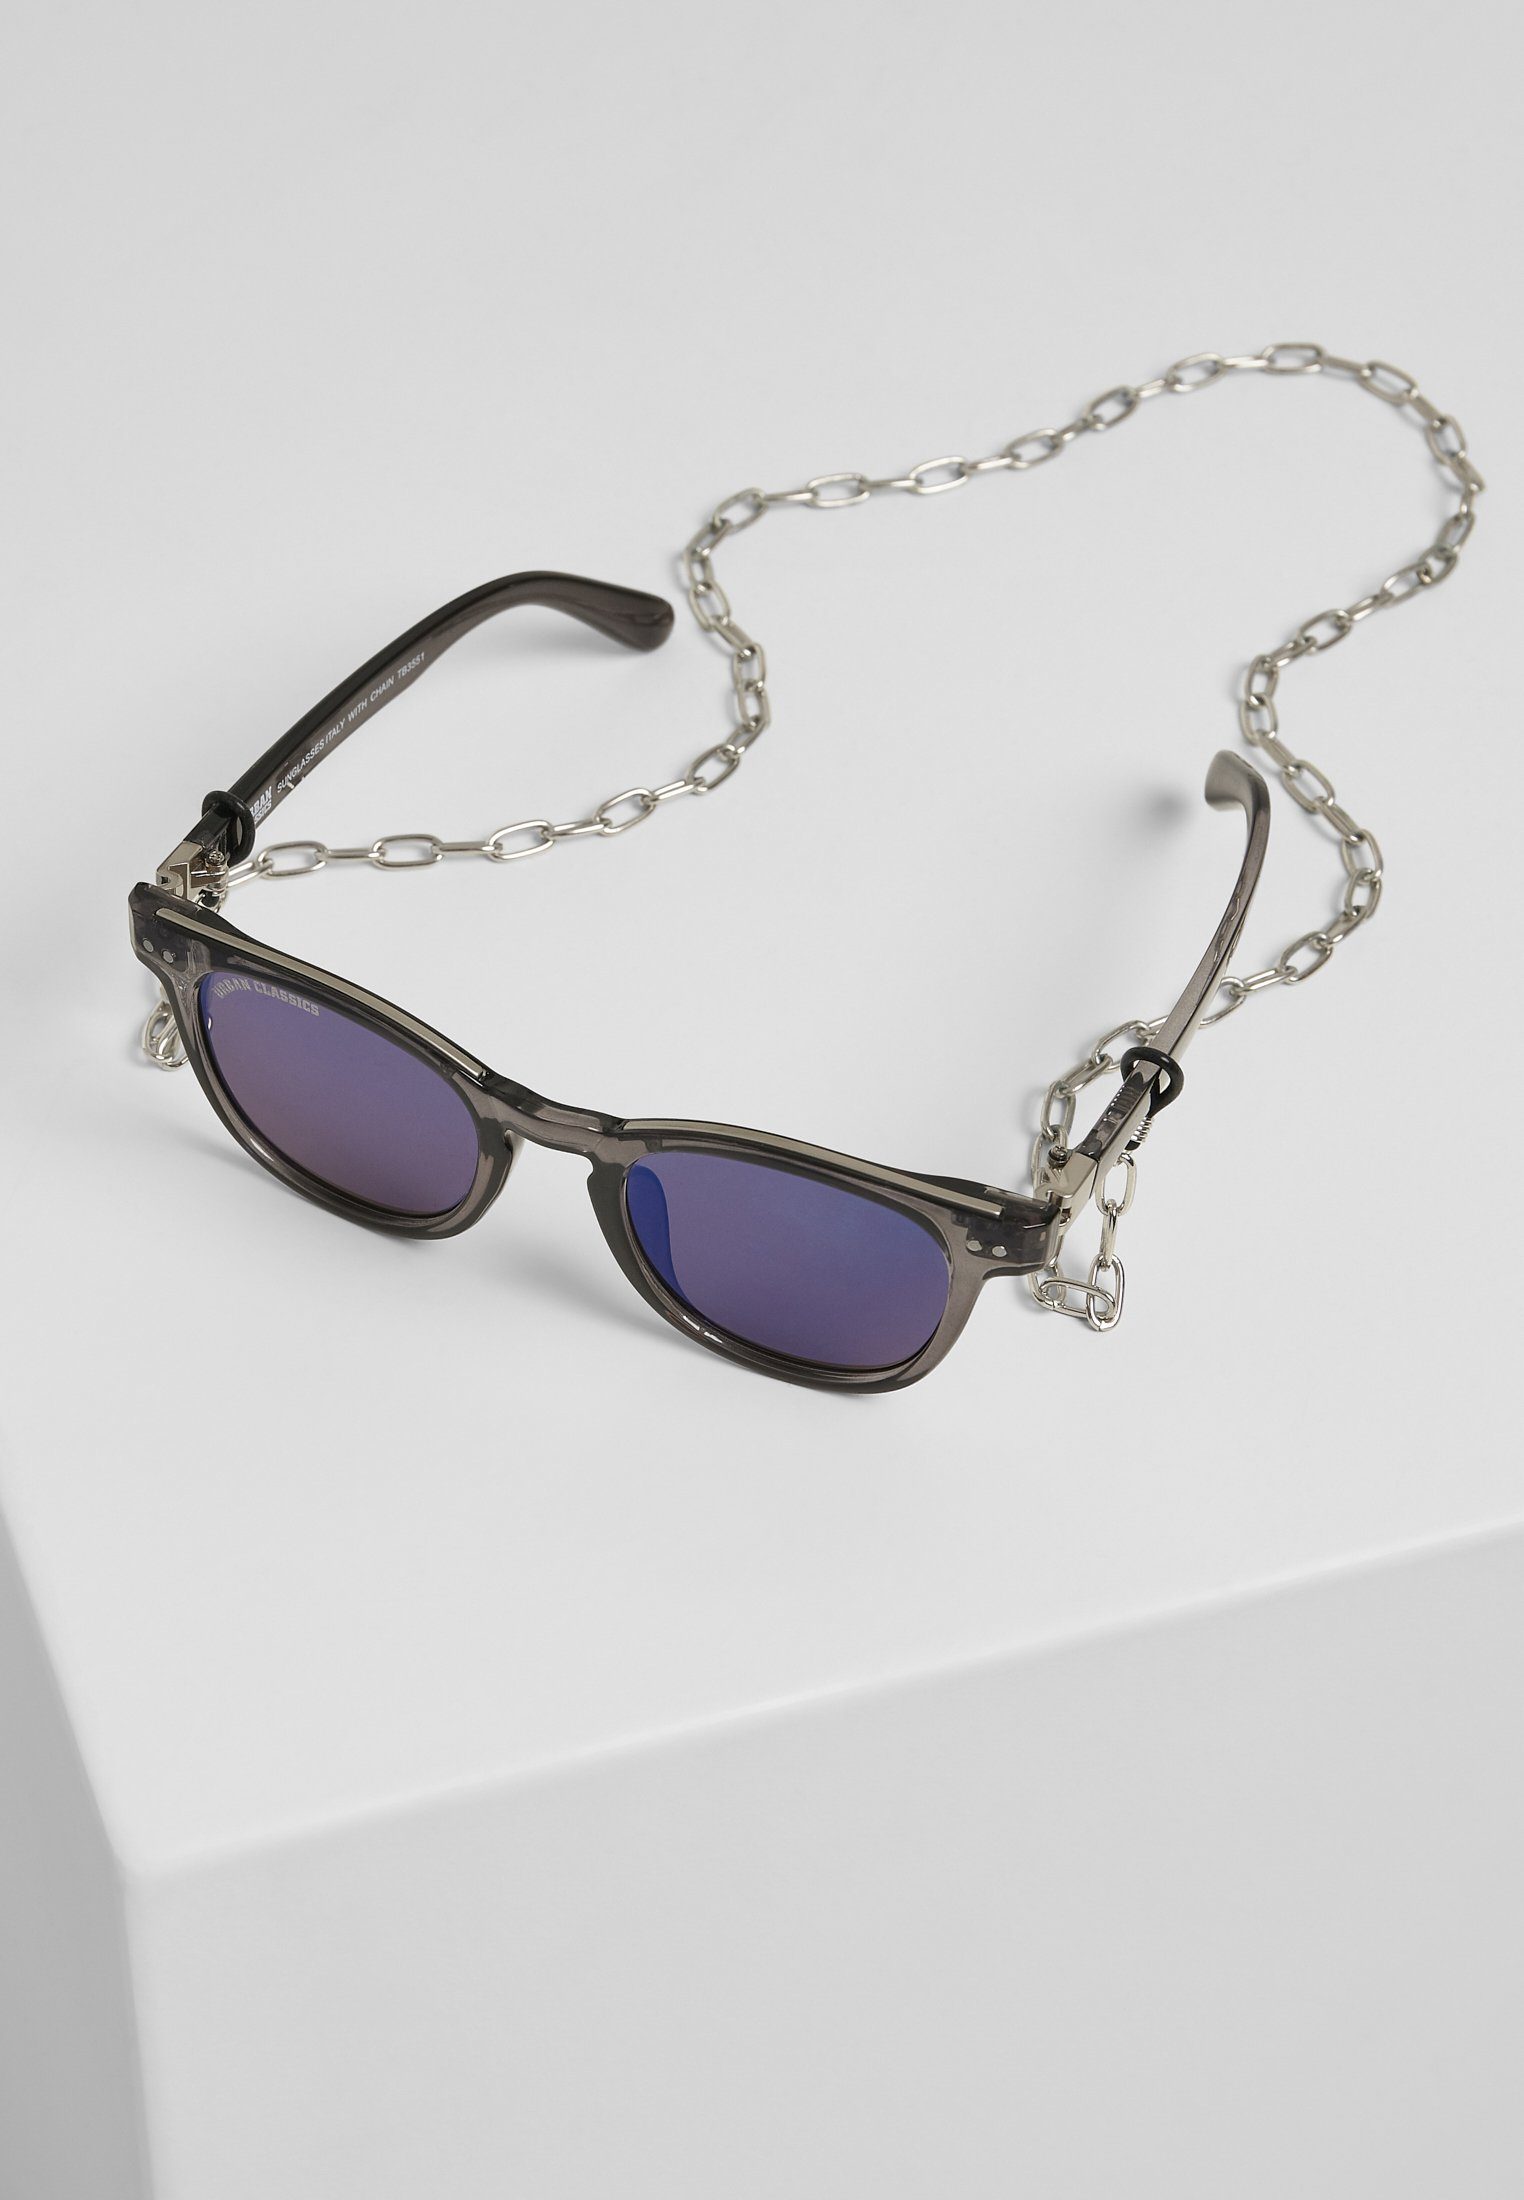 URBAN CLASSICS Sonnenbrille Unisex Italy with chain grey/silver/silver Sunglasses